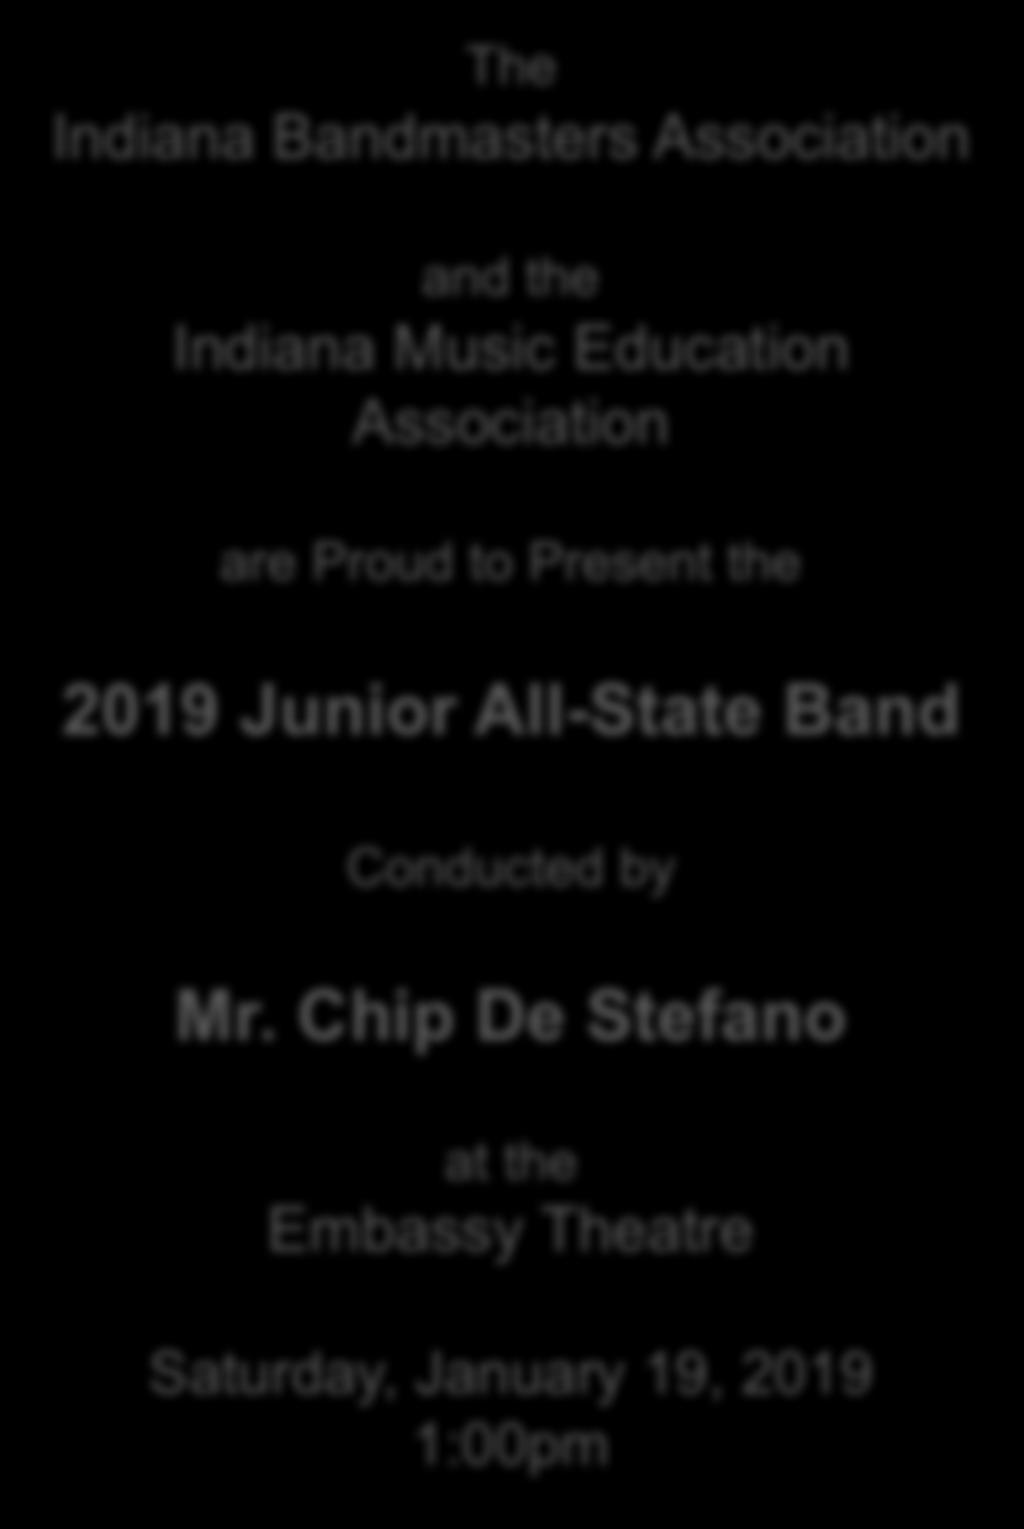 The Indiana Bandmasters Association and the Indiana Music Education Association Absolutely no cell phones are to be on stage during any rehearsal or during the performance; this will be strictly